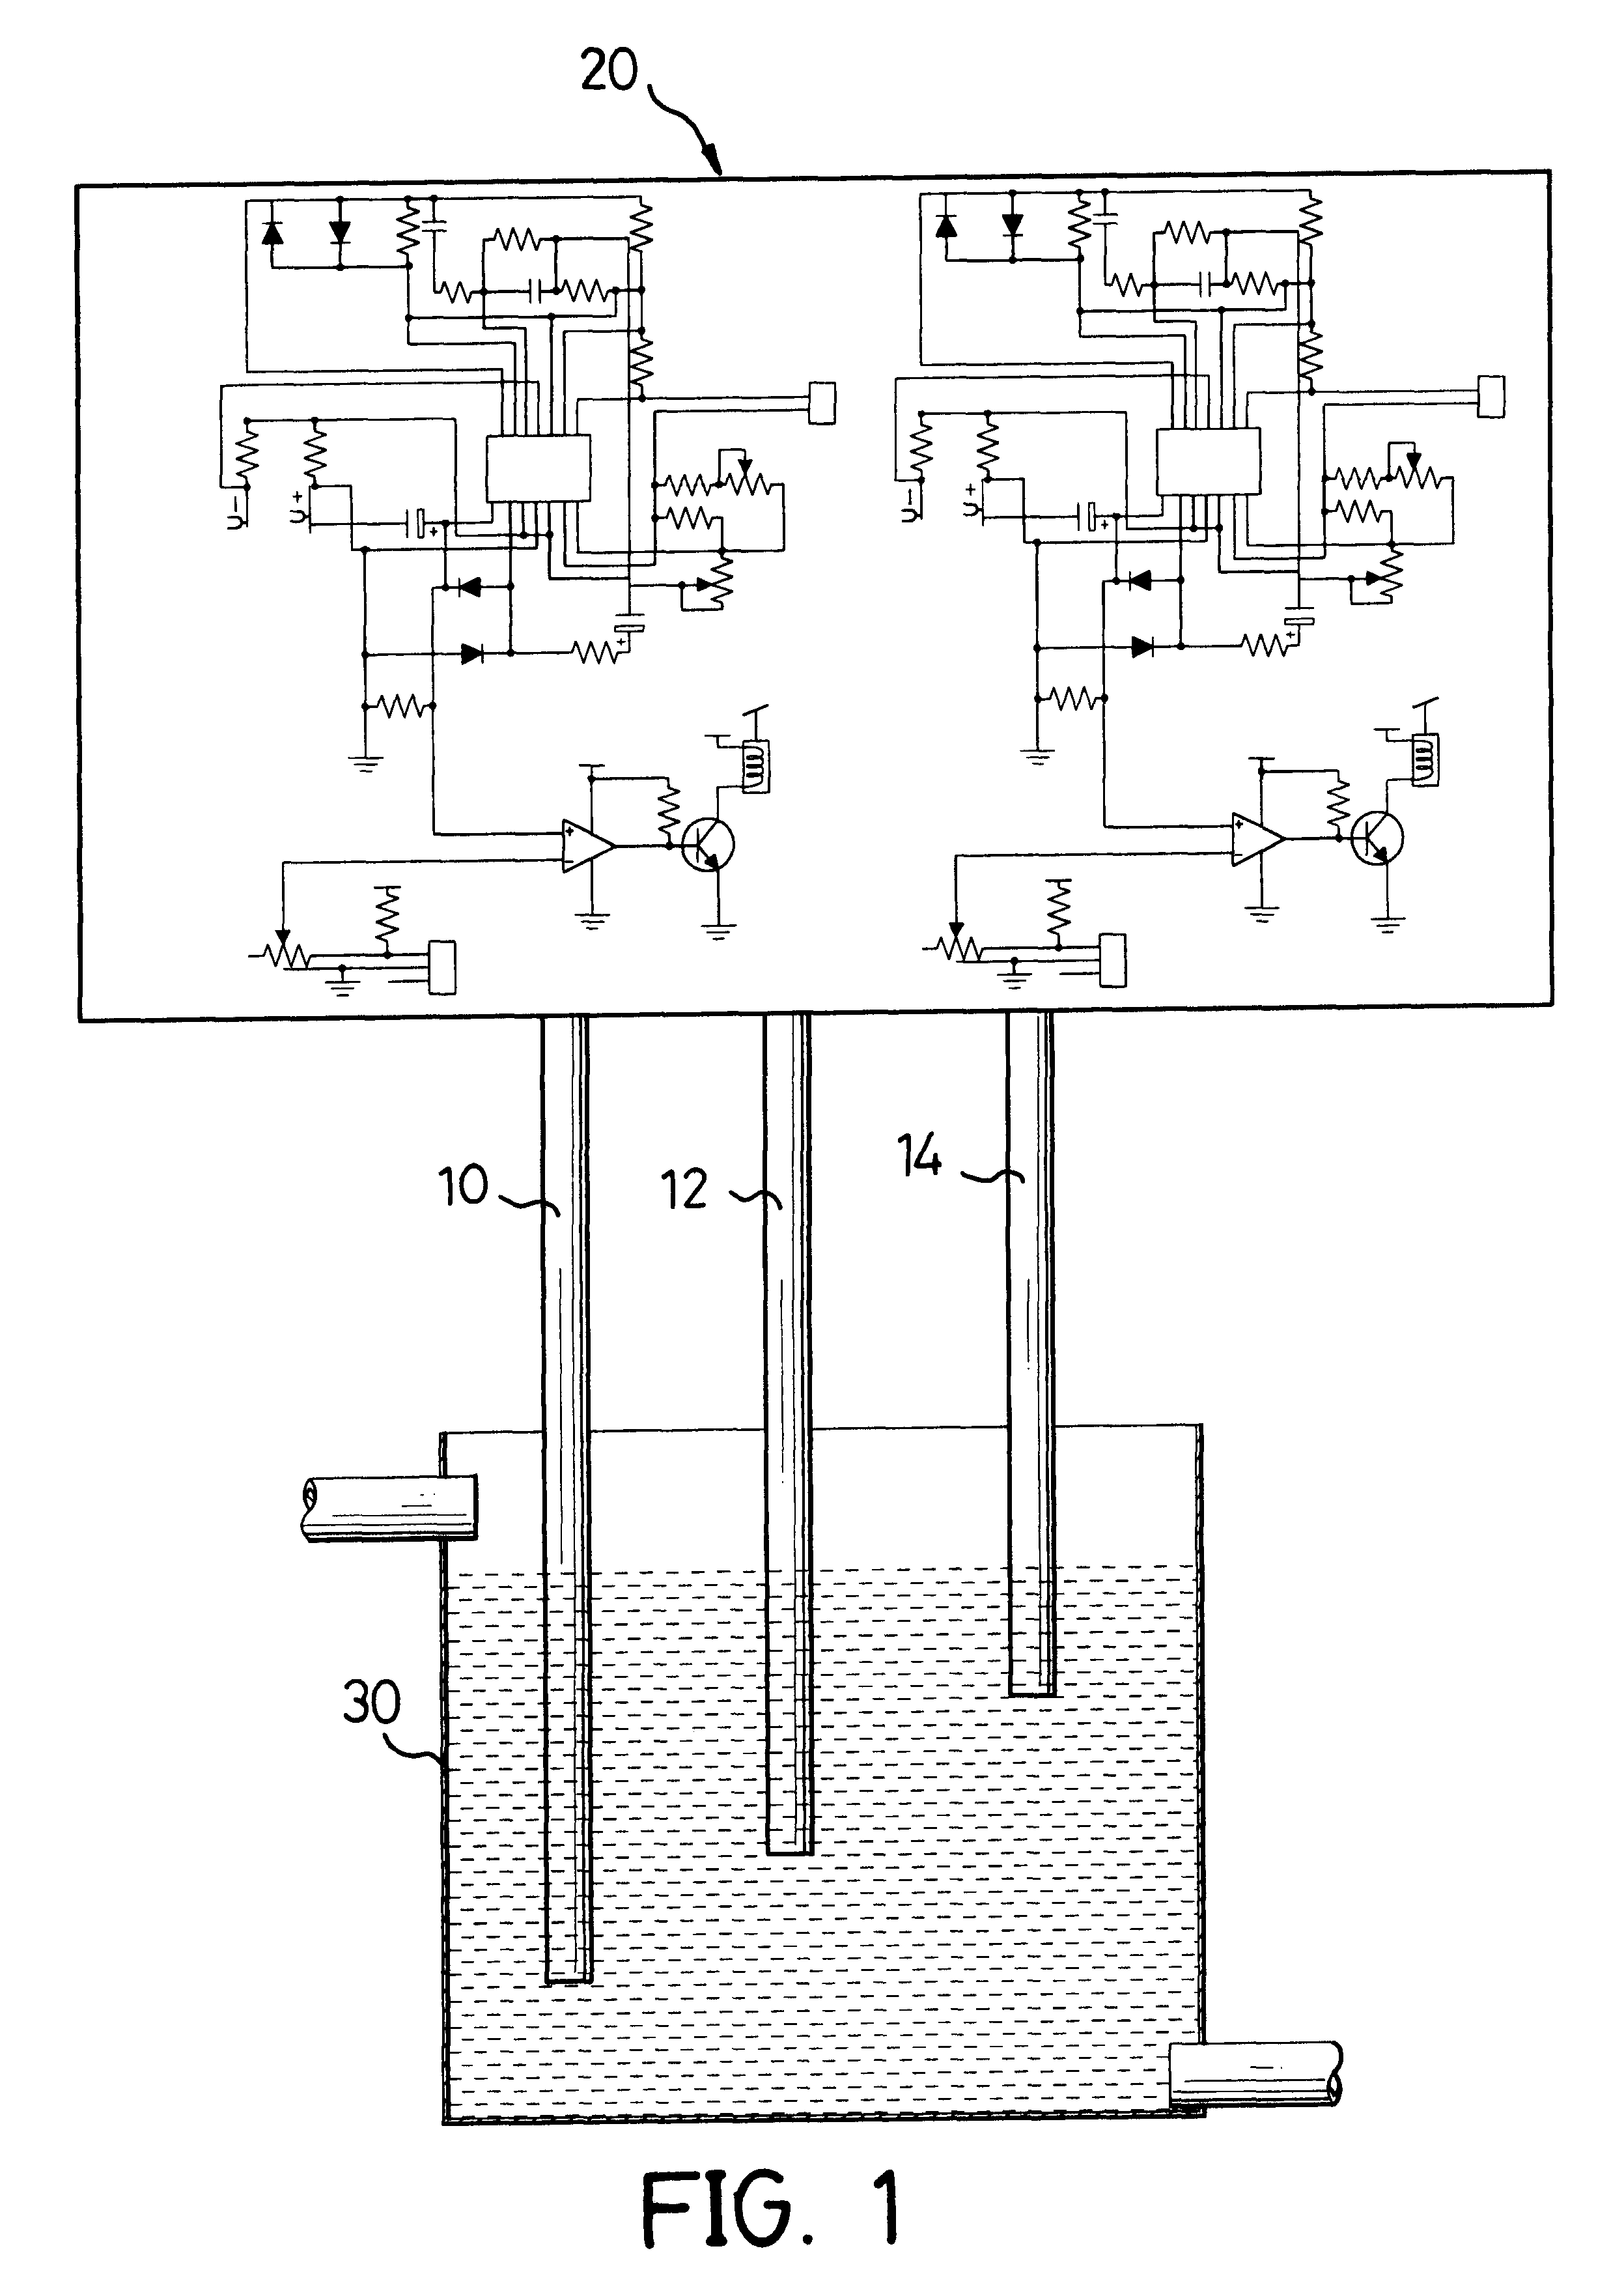 Water level controller with conductance terminals